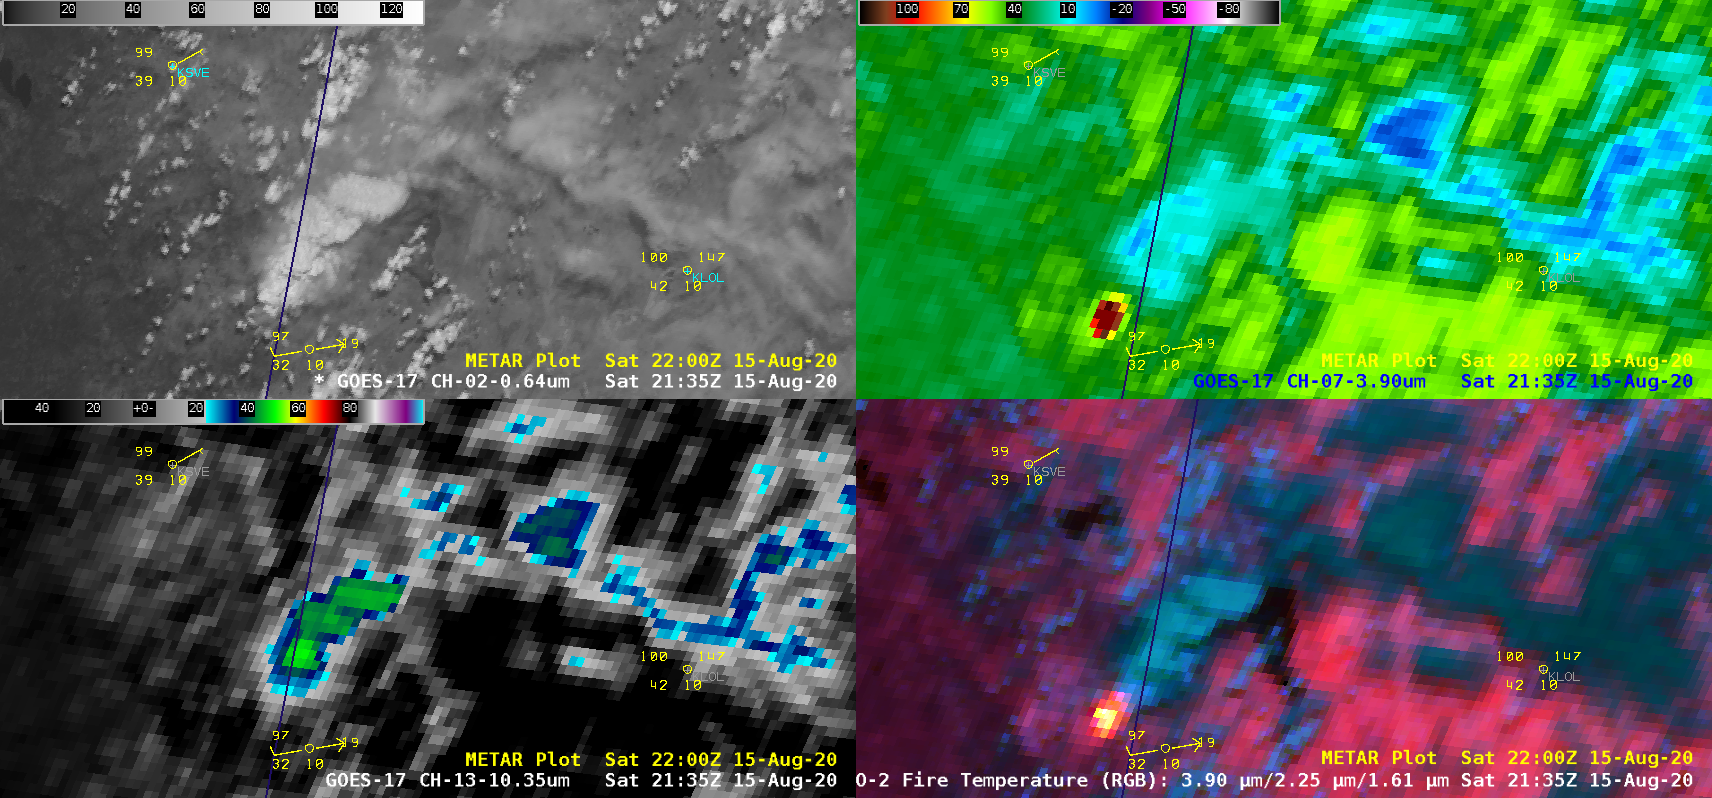 GOES-17 Visible (0.64 µm, top left), Shortwave Infrared (3.9 µm, top right), Infrared Window (10.35 µm, bottom left) and Fire Temperature RGB (bottom right) [click to play animation | MP4]